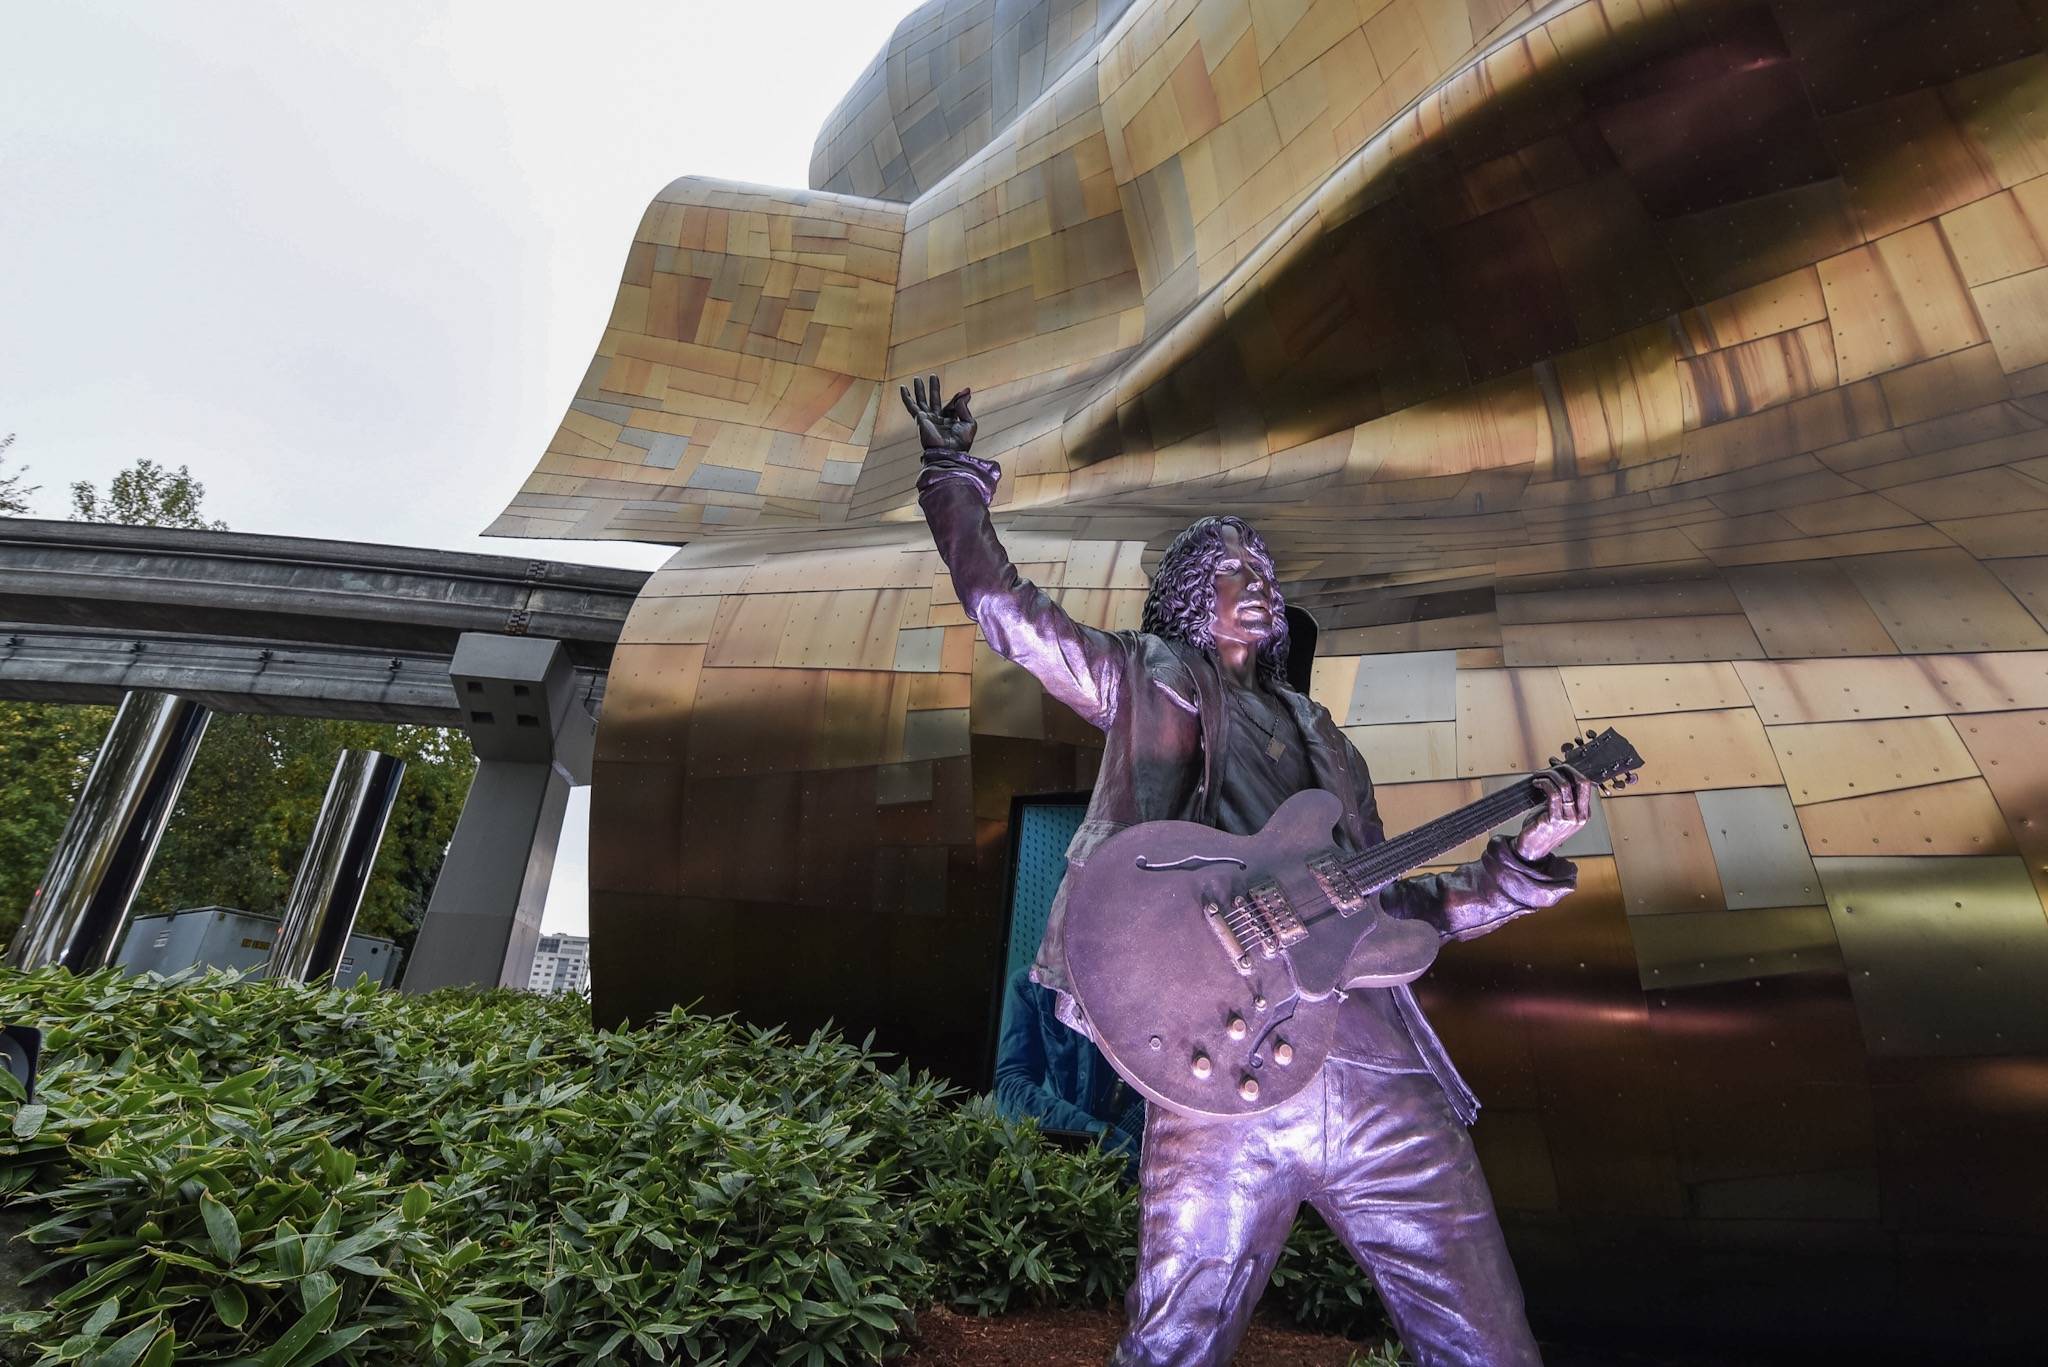 The new Chris Cornell statue resides outside of MoPop. Photo courtesy MoPop